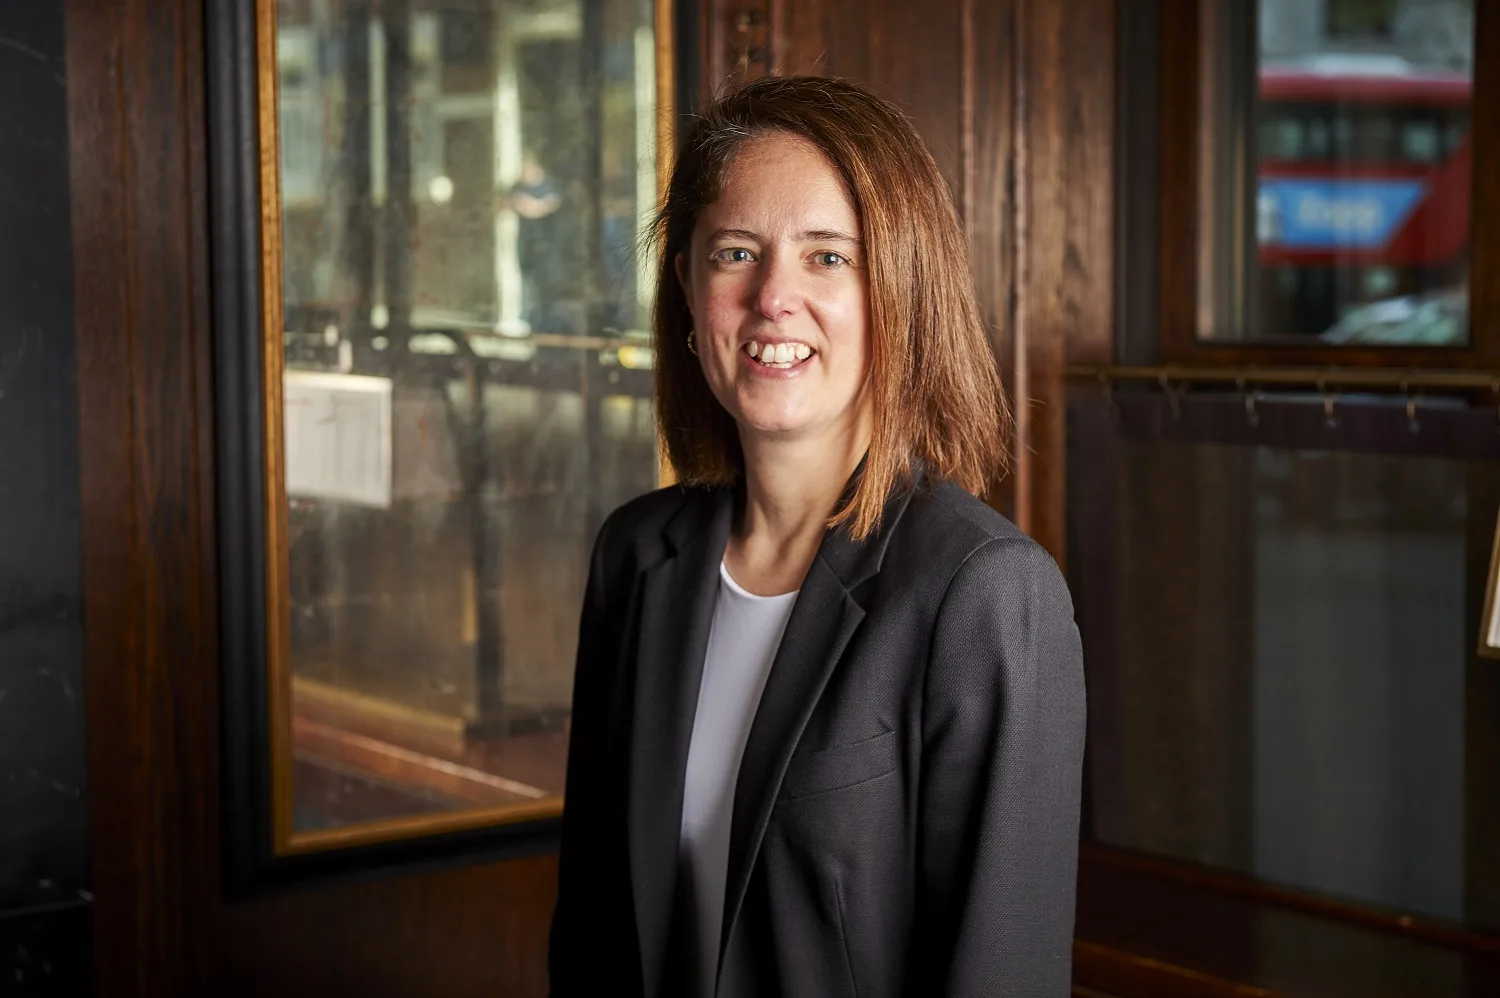 Michelle Chillingworth, General Manager at The Delaunay